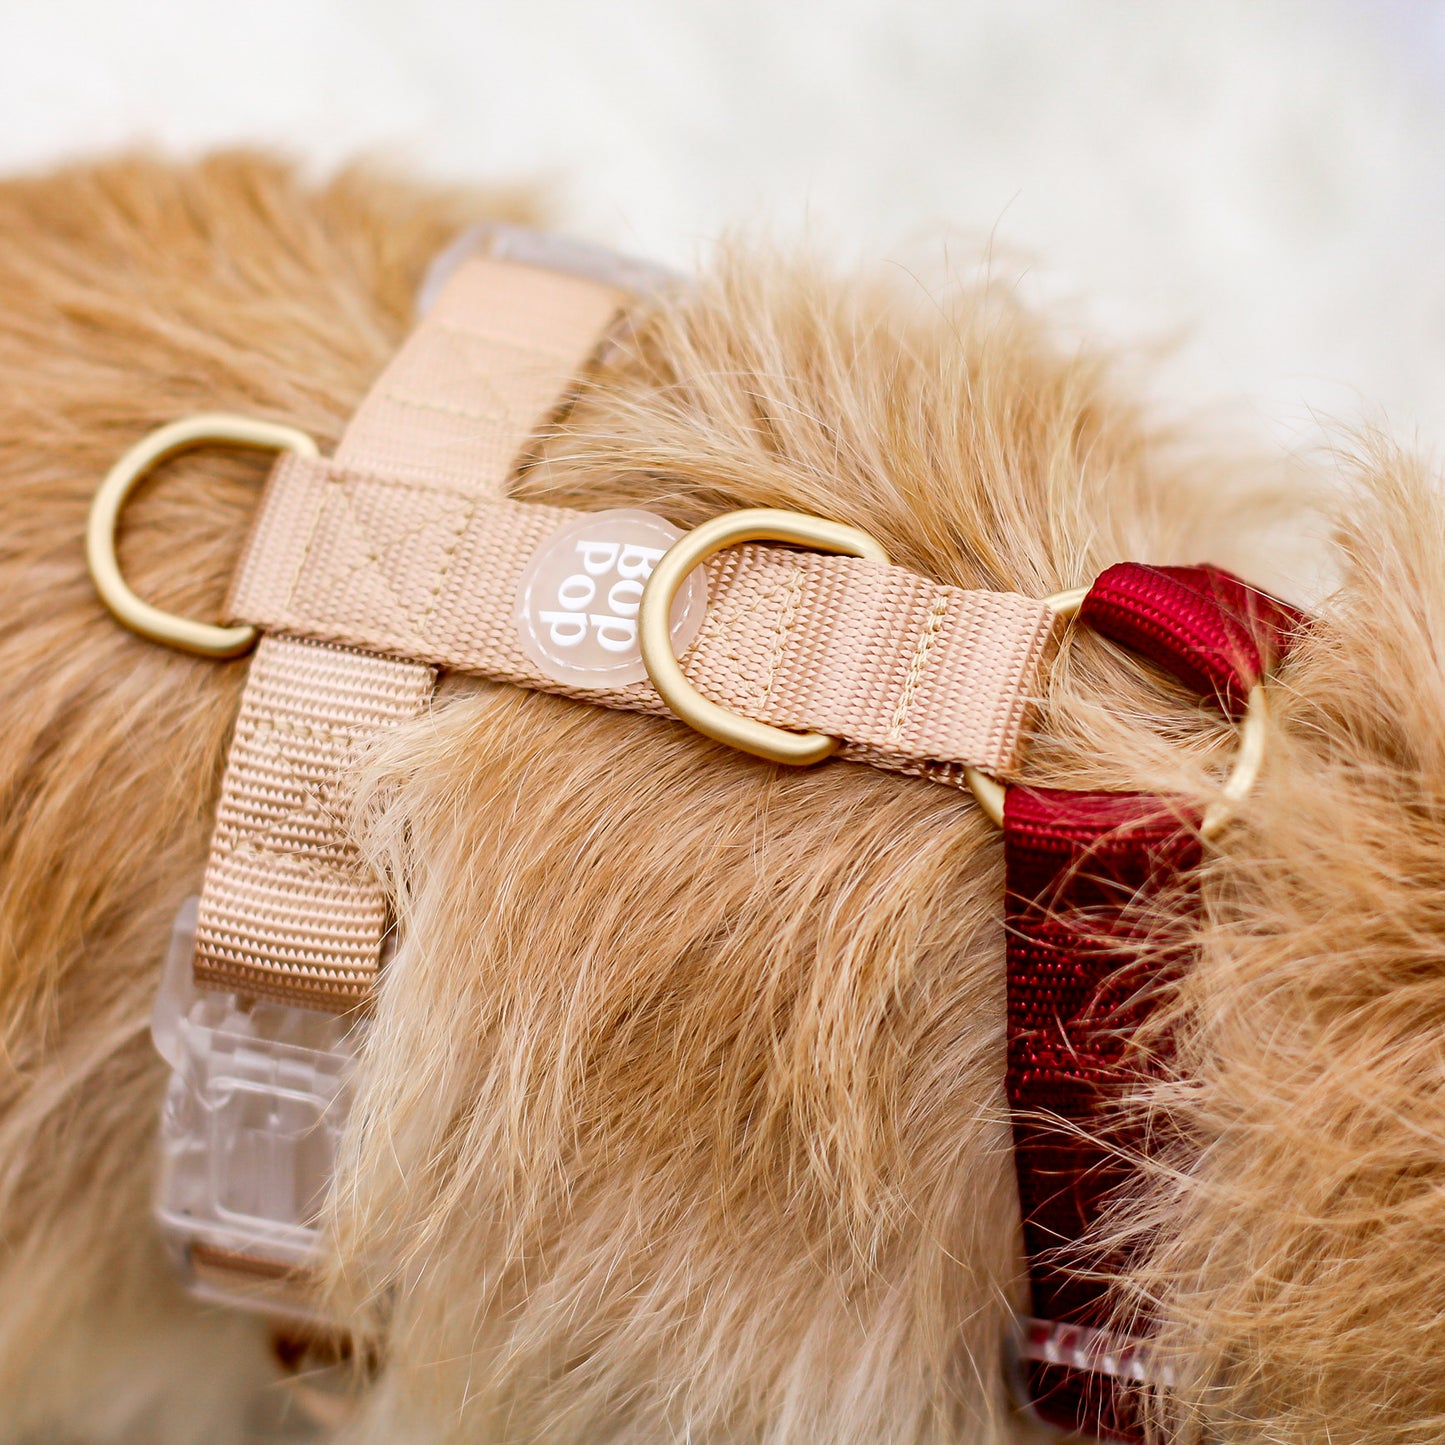 2 Color Dual Contrast Burgundy Rosewood Sand Beige Neutral Classic Dog Nylon Strap Harness with Gold Hardware Clear Buckles Pet Accessory Bop Pop Pets Details Logo tag